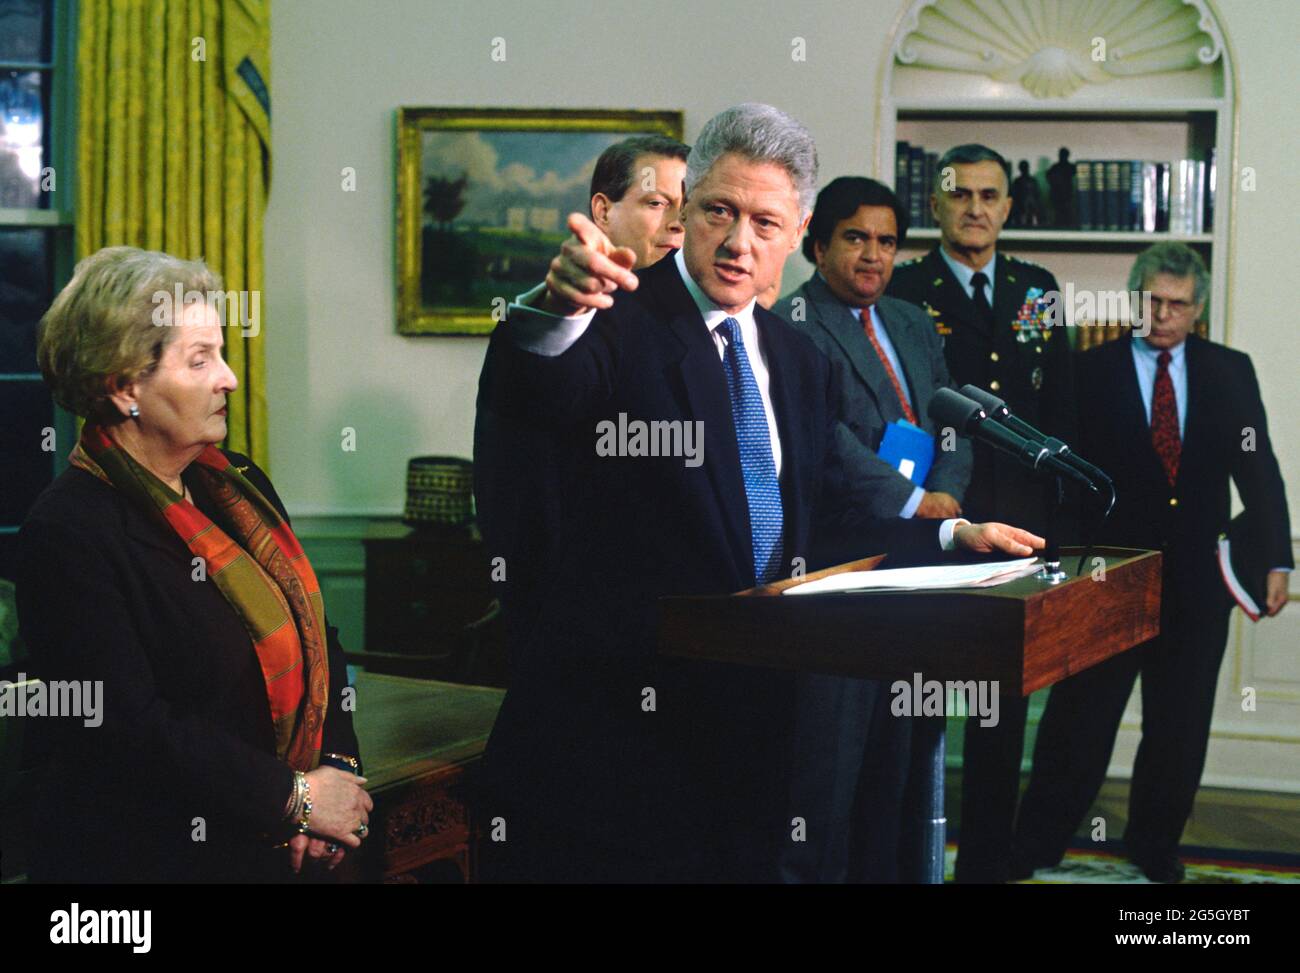 Washington, DC, USA. 23rd February 1998. U.S President Bill Clinton delivers a statement on Iraq from the Oval Office of the White House February 23, 1998 in Washington, D.C. Standing with Clinton from left to right are: Secretary of State Madeline Albright, Vice President Al Gore, Ambassador Bill Richardson, Joint Chiefs Chairman Hugh Shelton and National Security Advisor Sandy Berger. Stock Photo